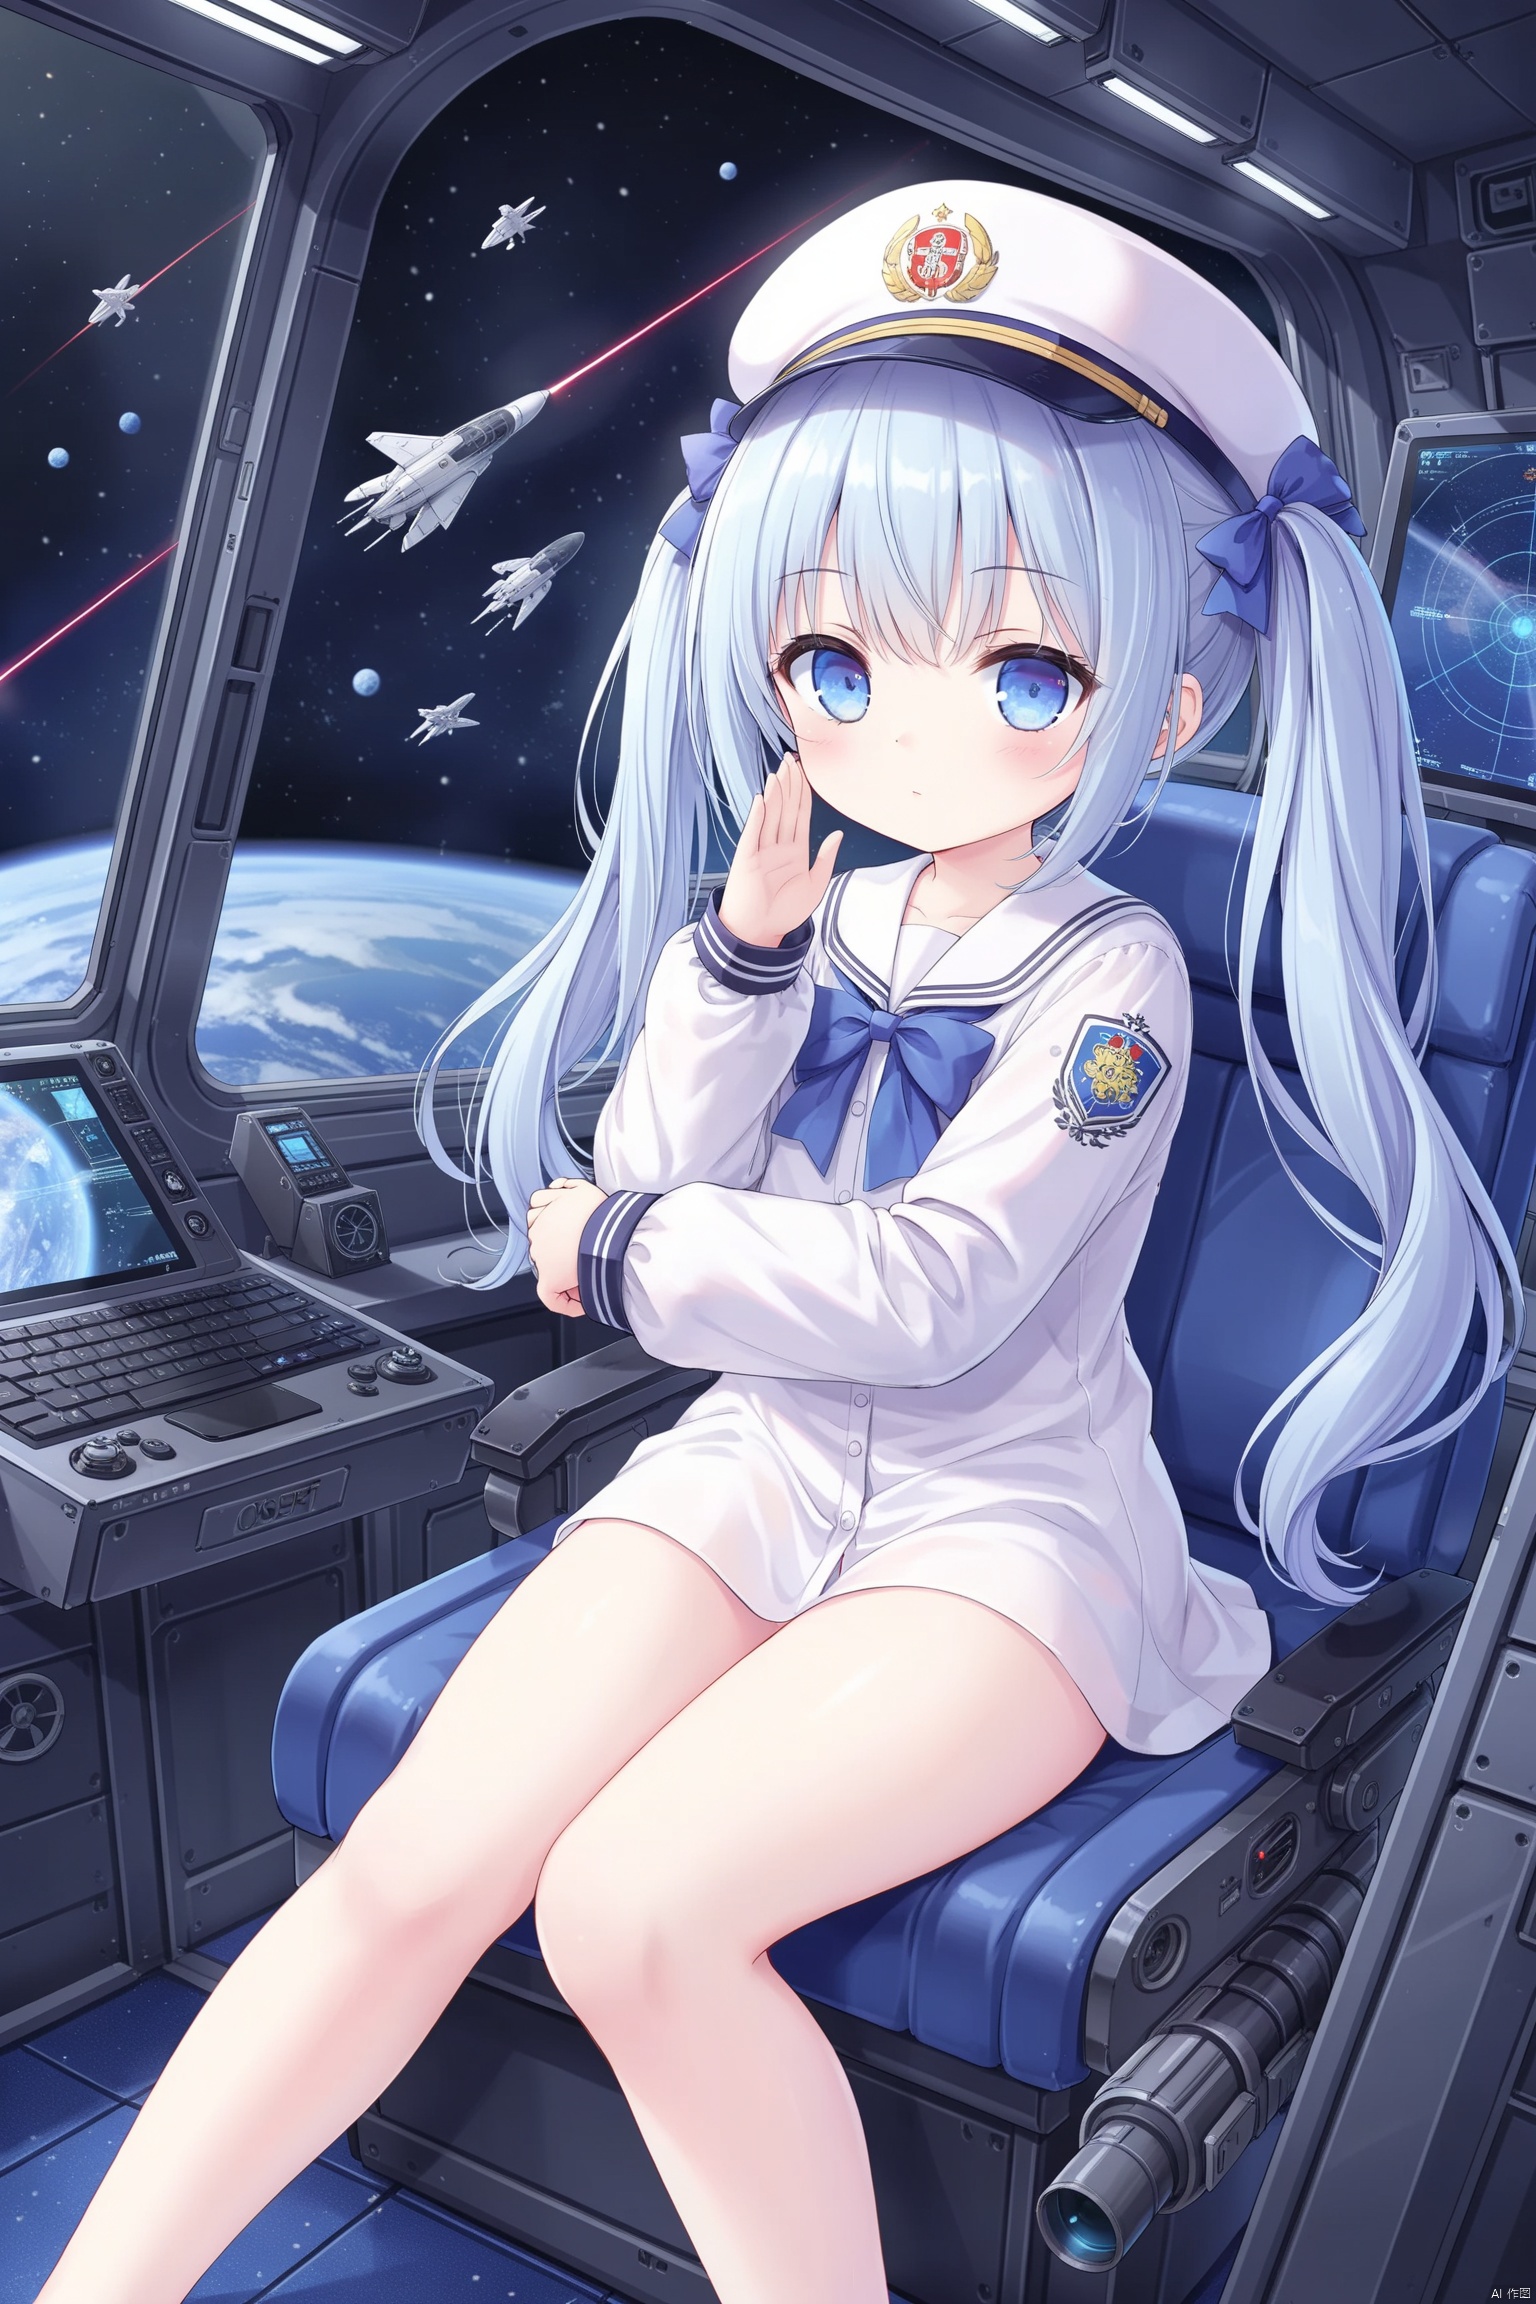 twintails,(loli), 1girl, solo, long_hair,Science Fiction Style, looking_at_window, blue_eyes,Cockpit, Window, Spaceship, Space Warship, Laser Cannon, Space Warsuit, Hat, Emblem, Space, Space Warfare, shirt,shirt bow,Salute, Full of vitality,huging stuffed sharkd,military uniform,ribbon,Screen, strategy map, commander,bottomless,